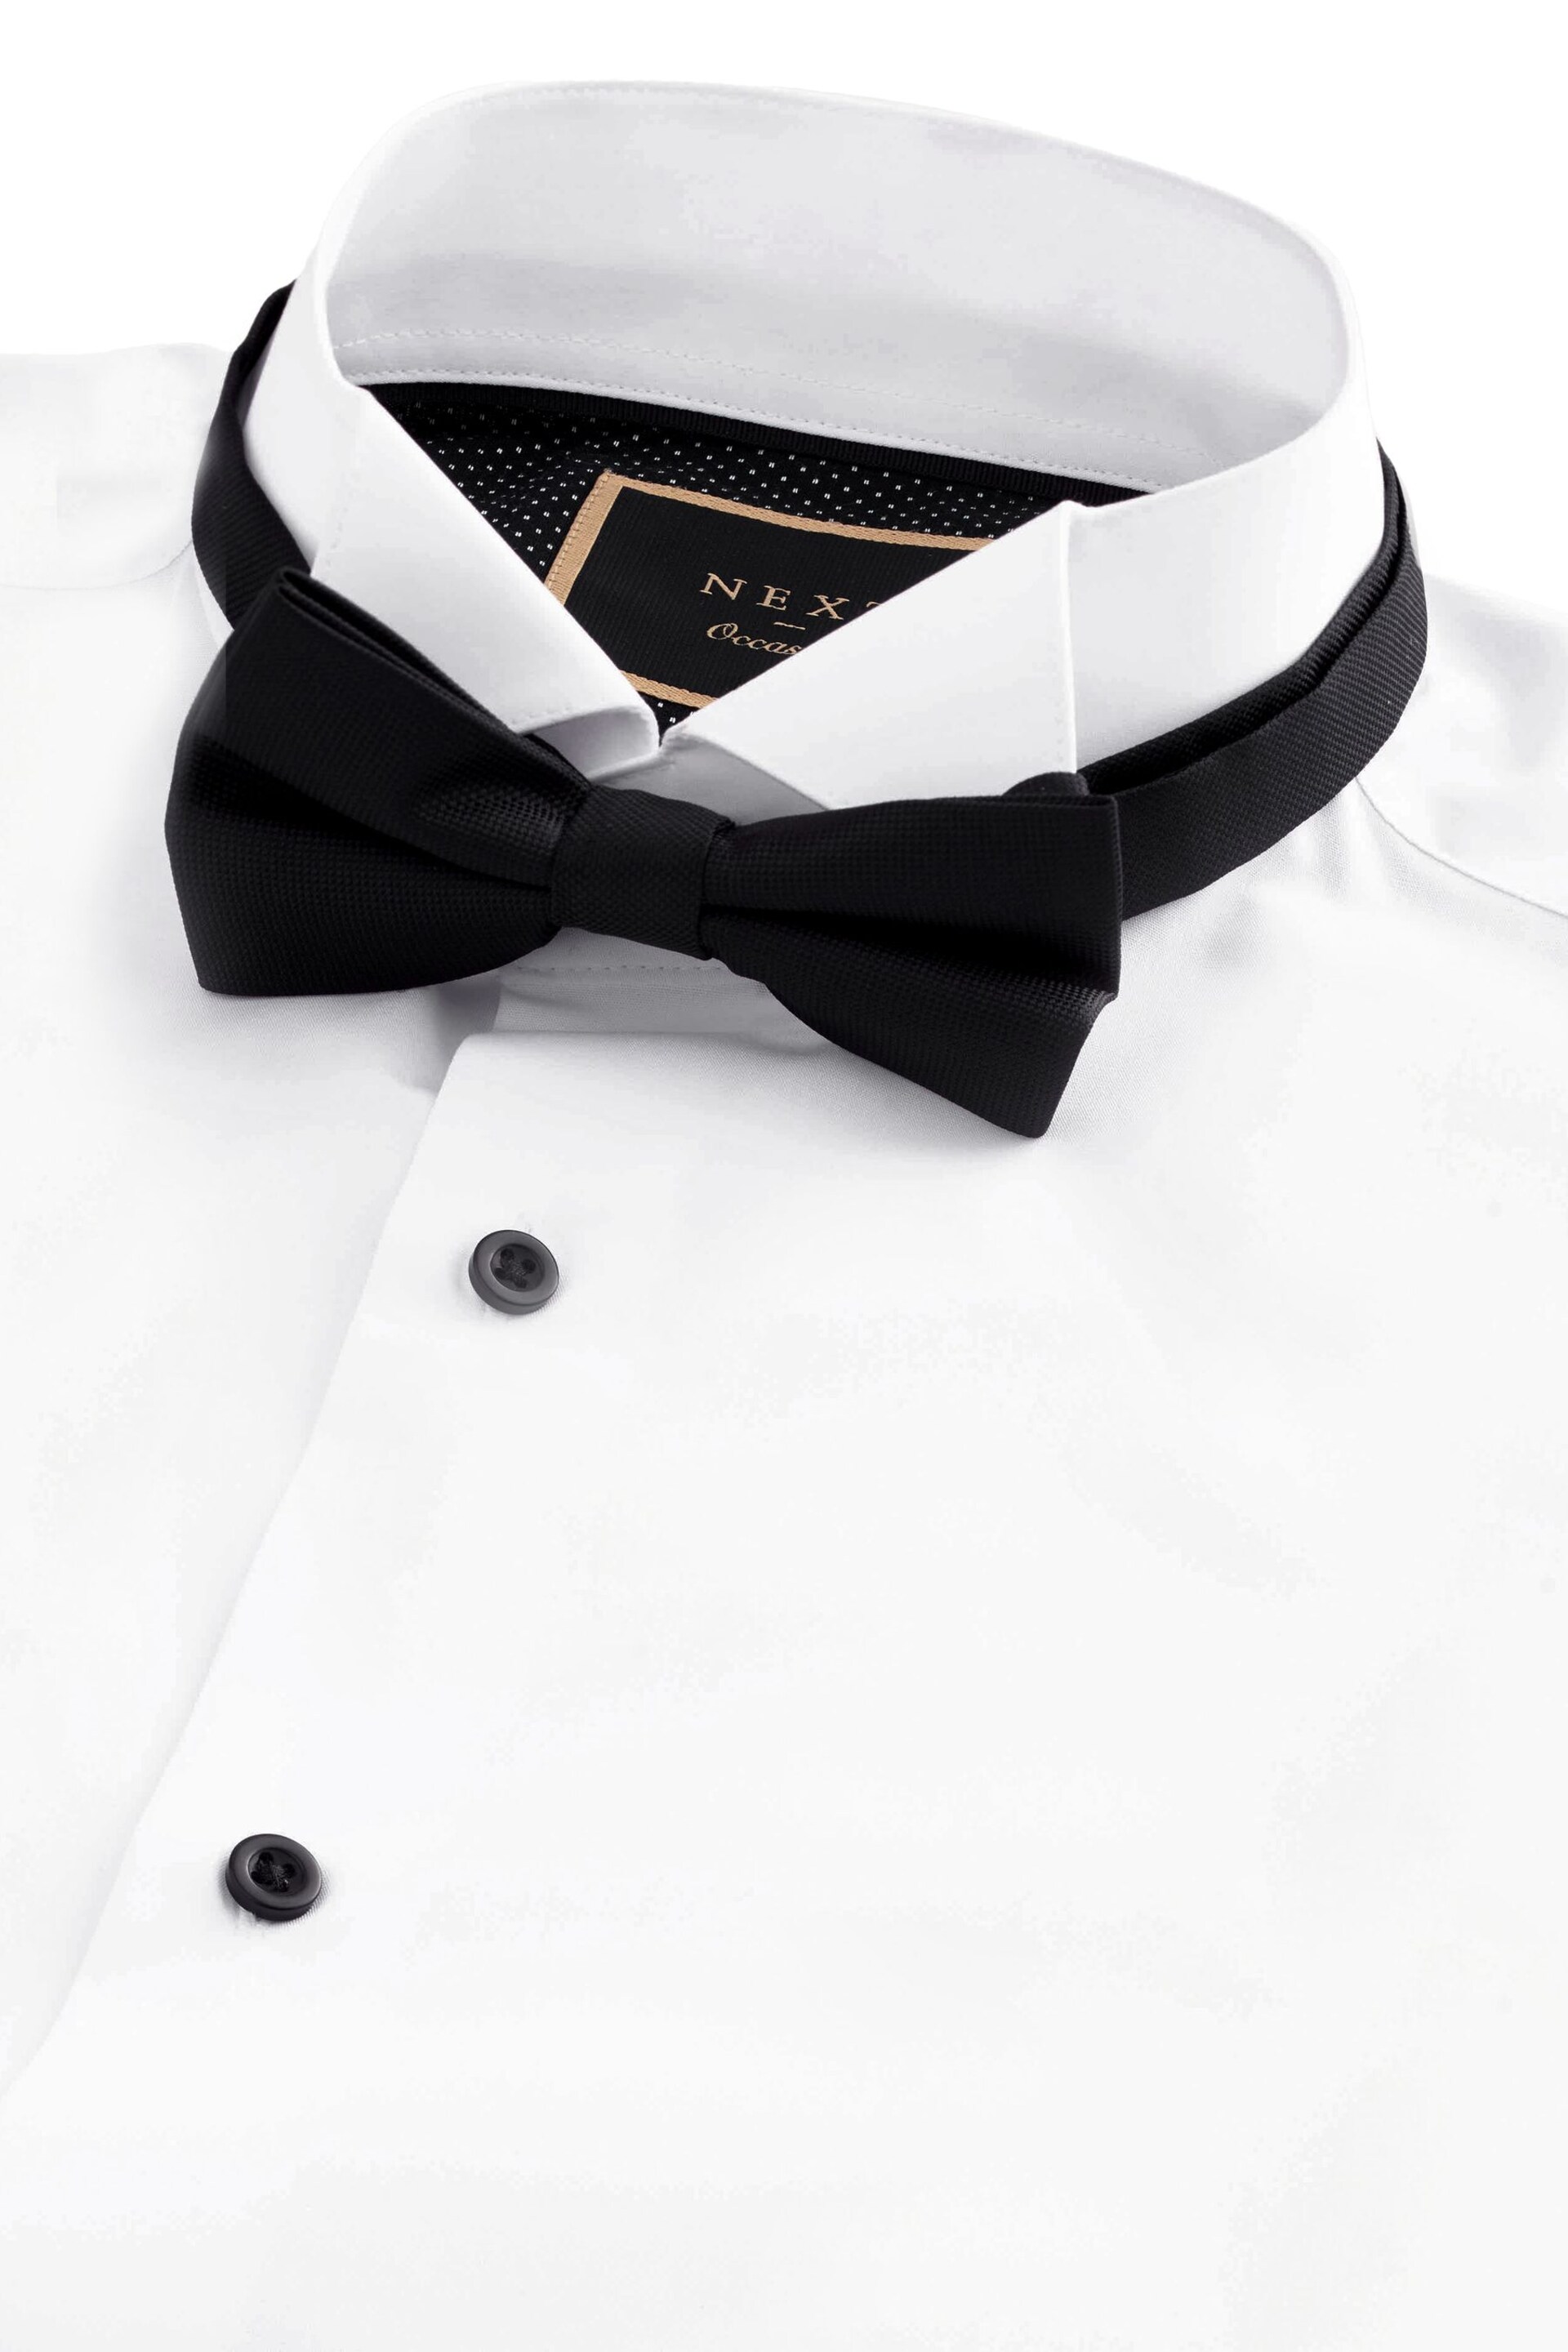 White/Black Slim Fit Single Cuff Occasion Shirt And Bow Tie Set - Image 5 of 7